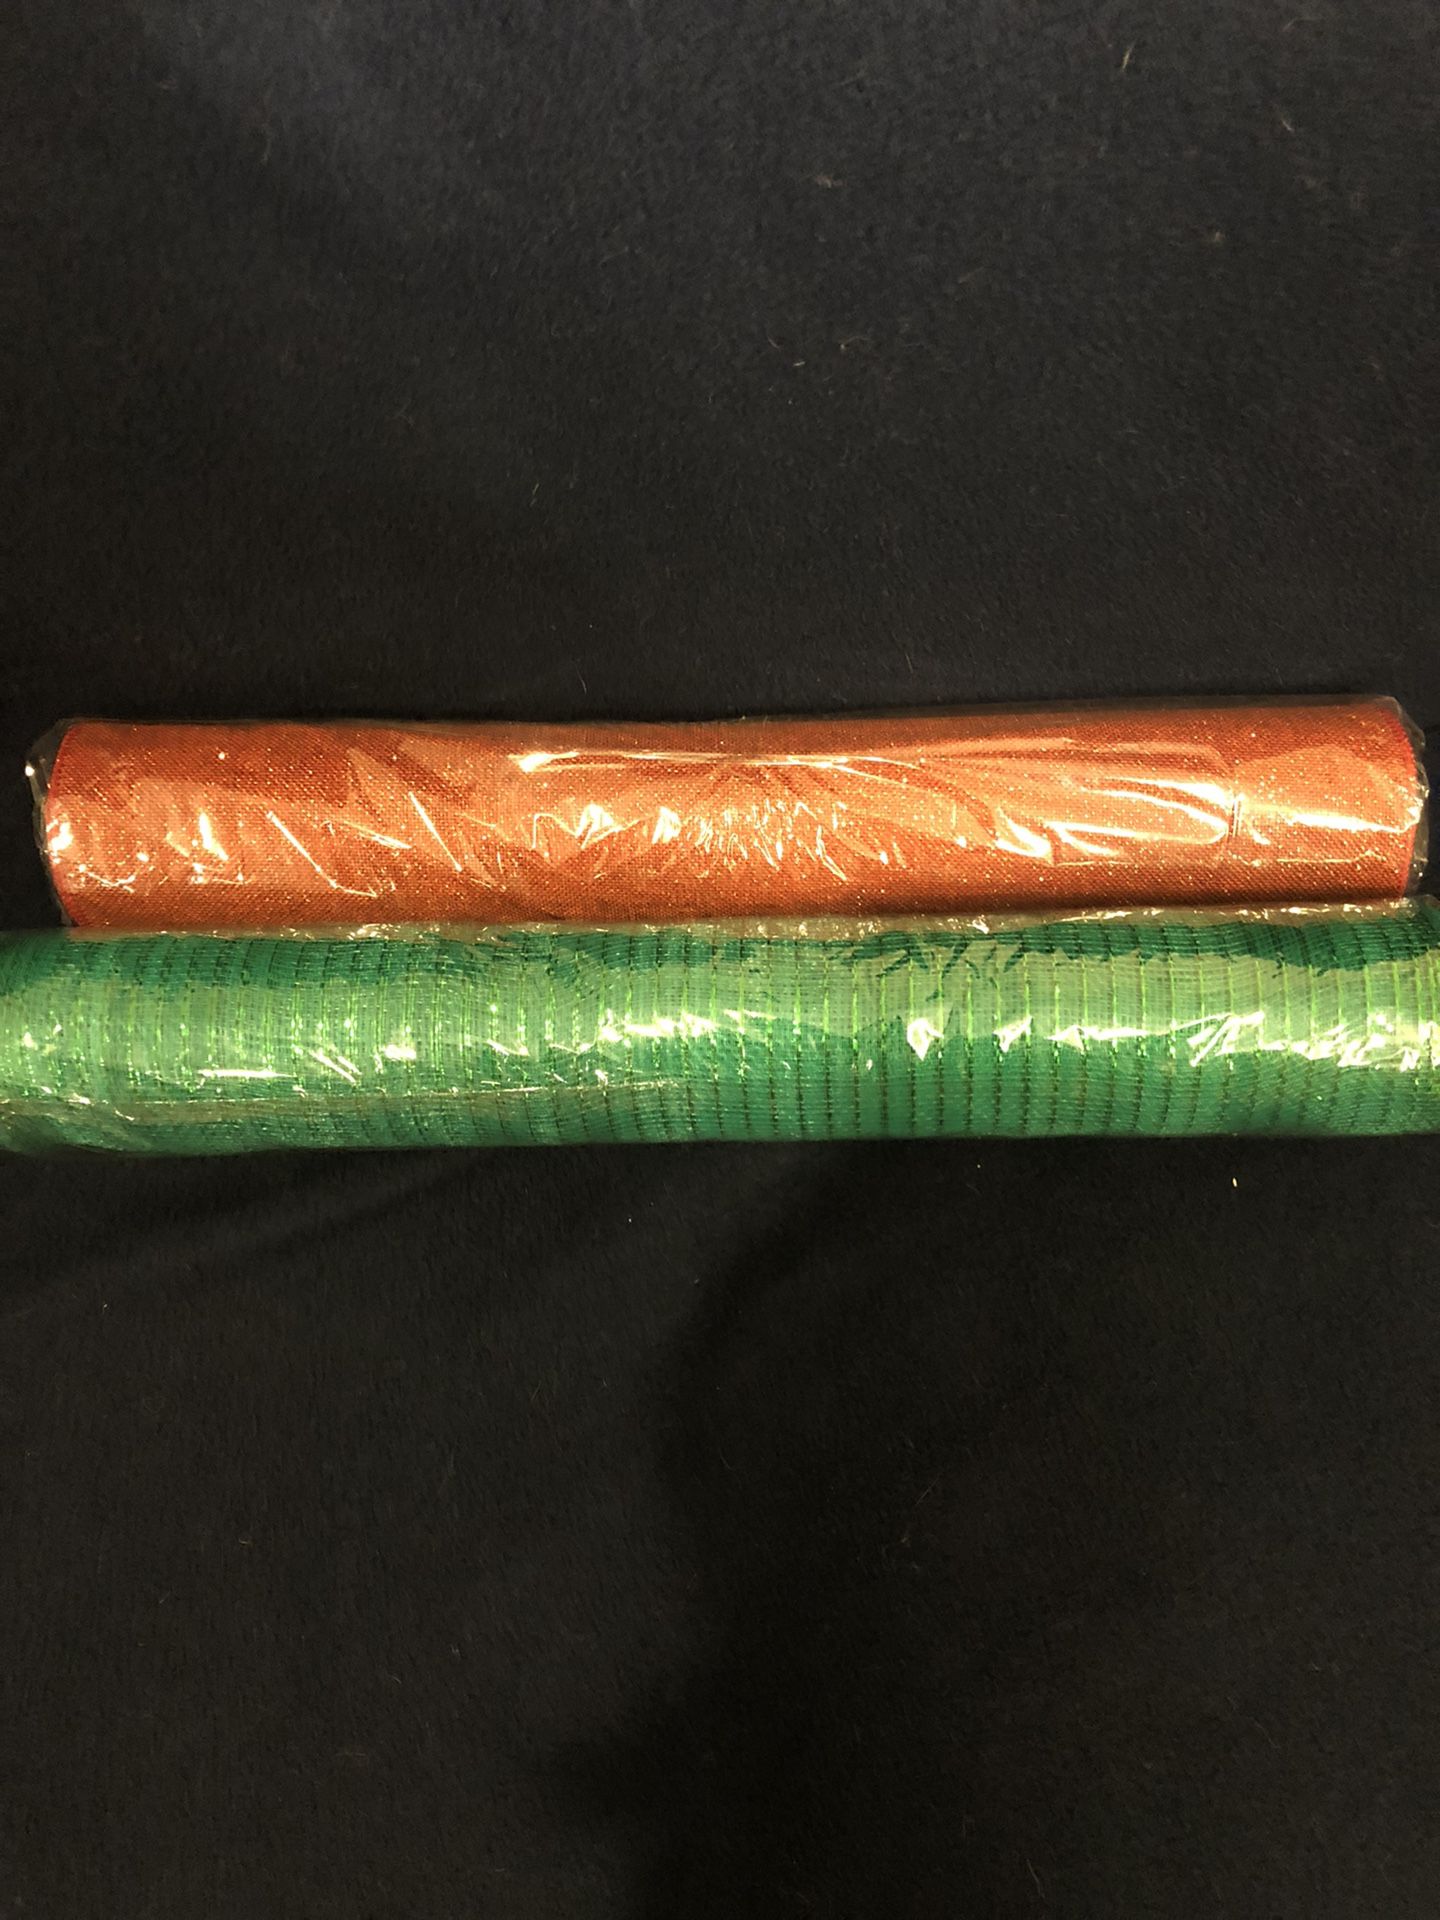 Deco Mesh - 2 rolls, 1 Red, 1 Green - New in Package 